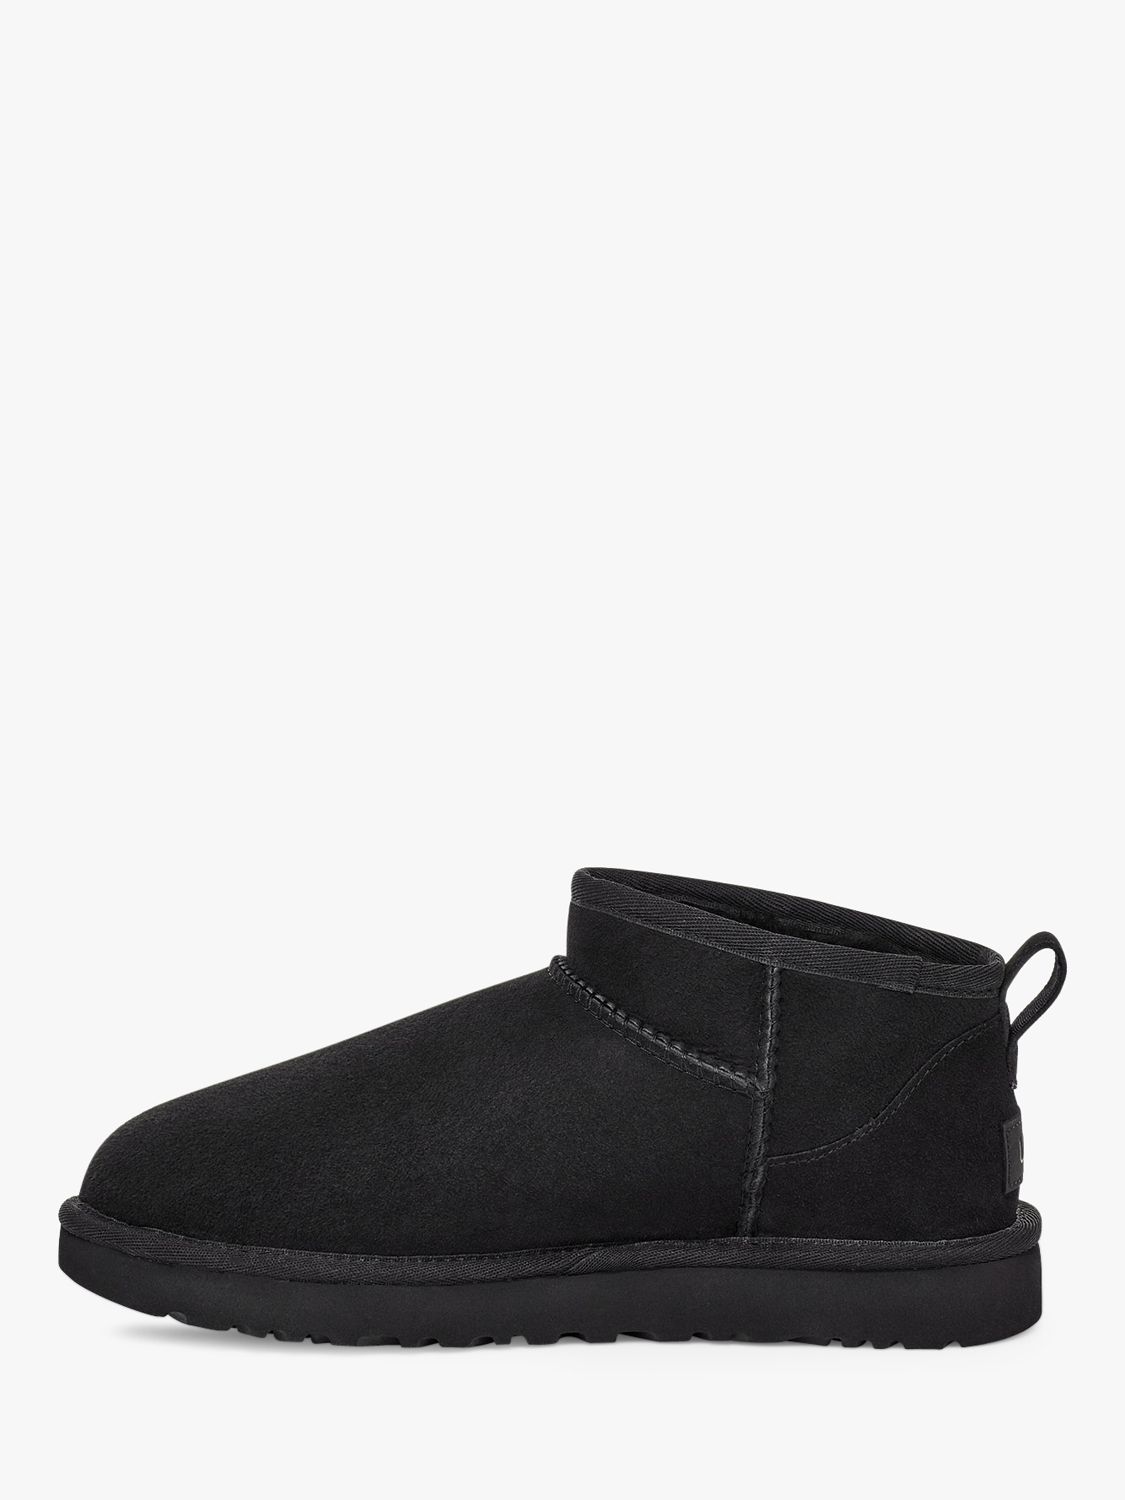 UGG Classic Ultra Mini Sheepskin and Suede Ankle Boots, Black at John ...